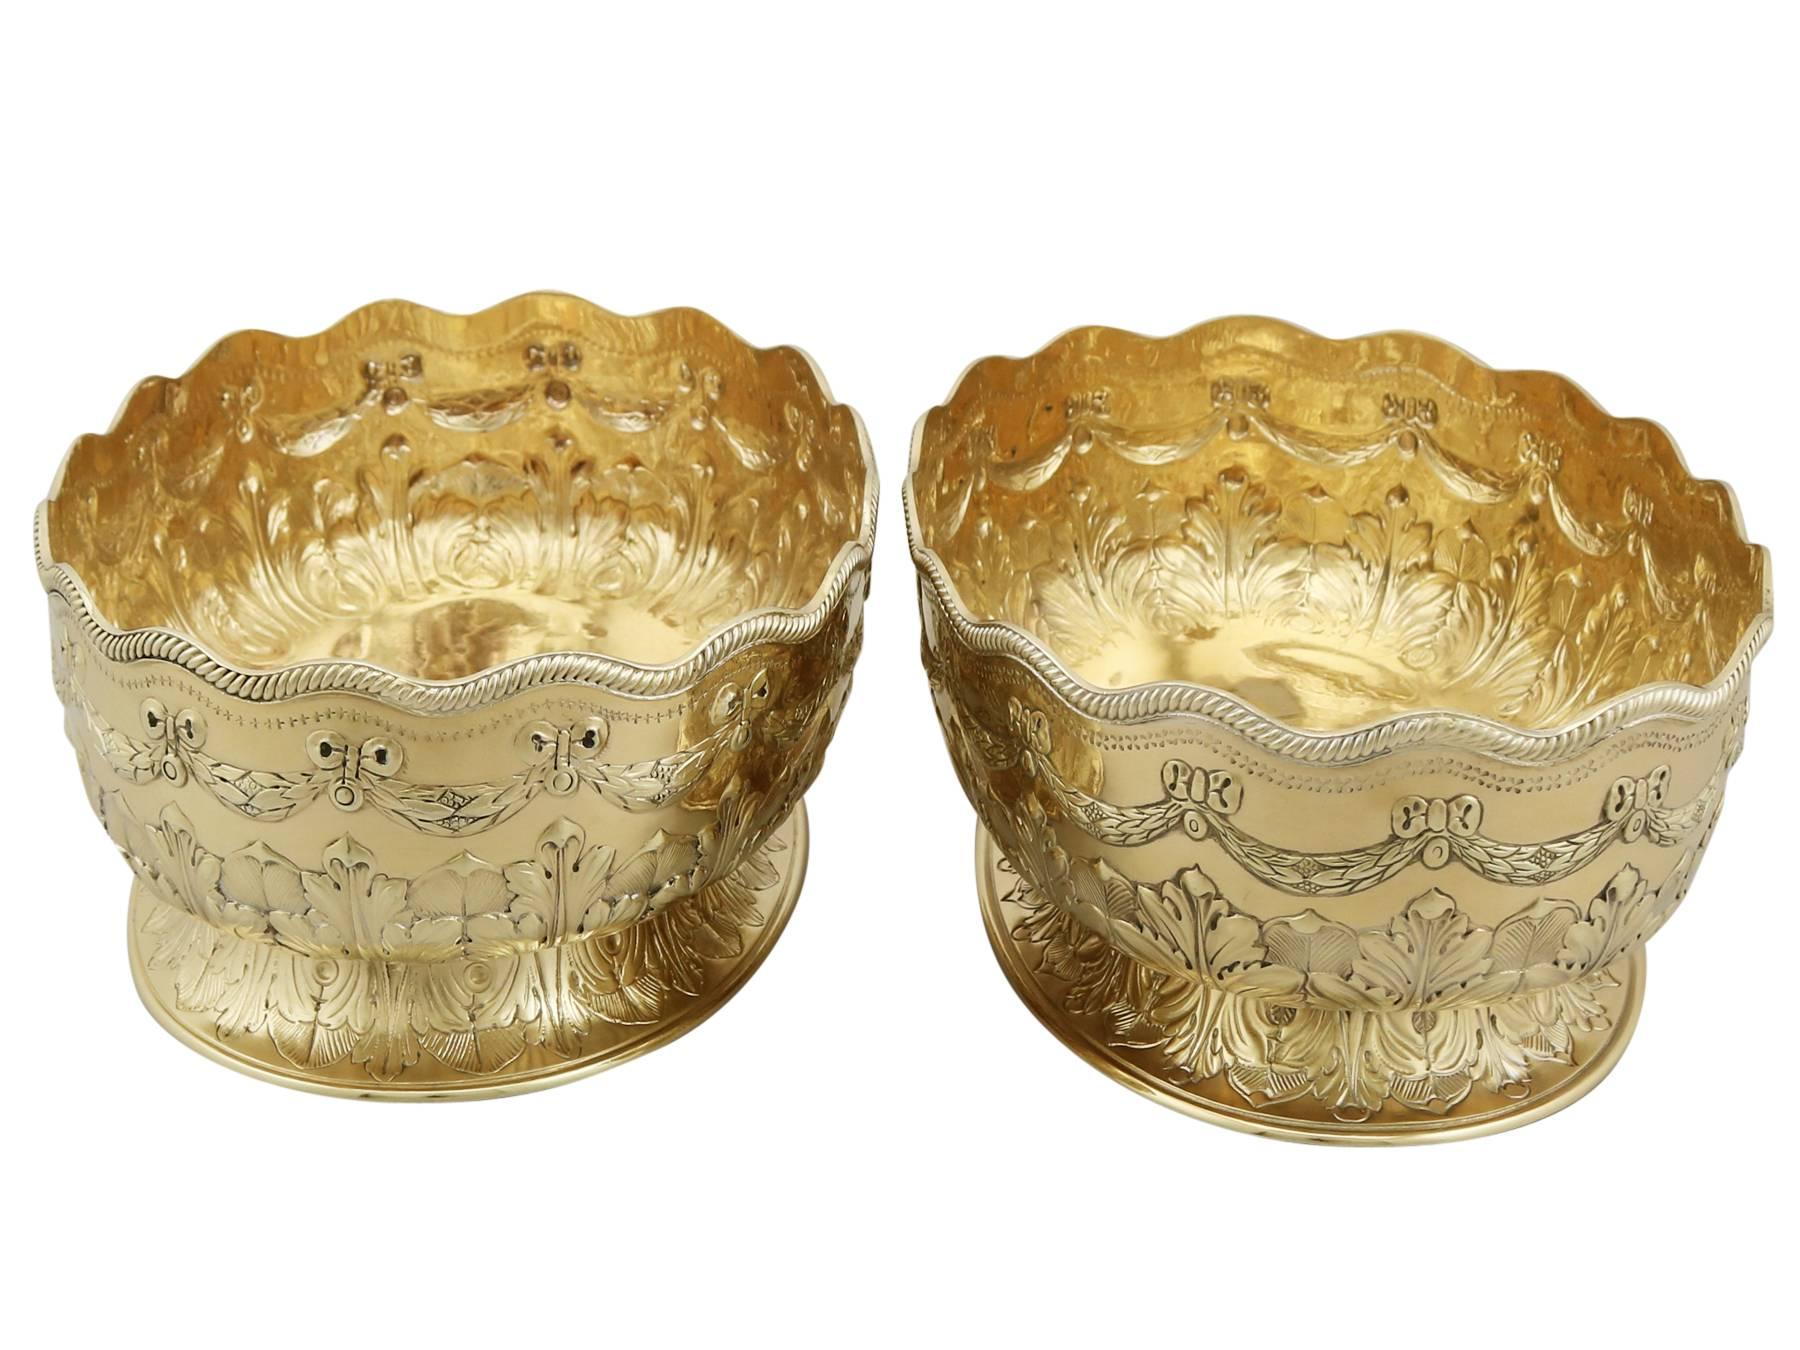 An exceptional, fine and impressive pair of antique Victorian English sterling silver gilt presentation dishes; part of our presentation silverware collection.

These exceptional antique Victorian English sterling silver bowls have an oval form